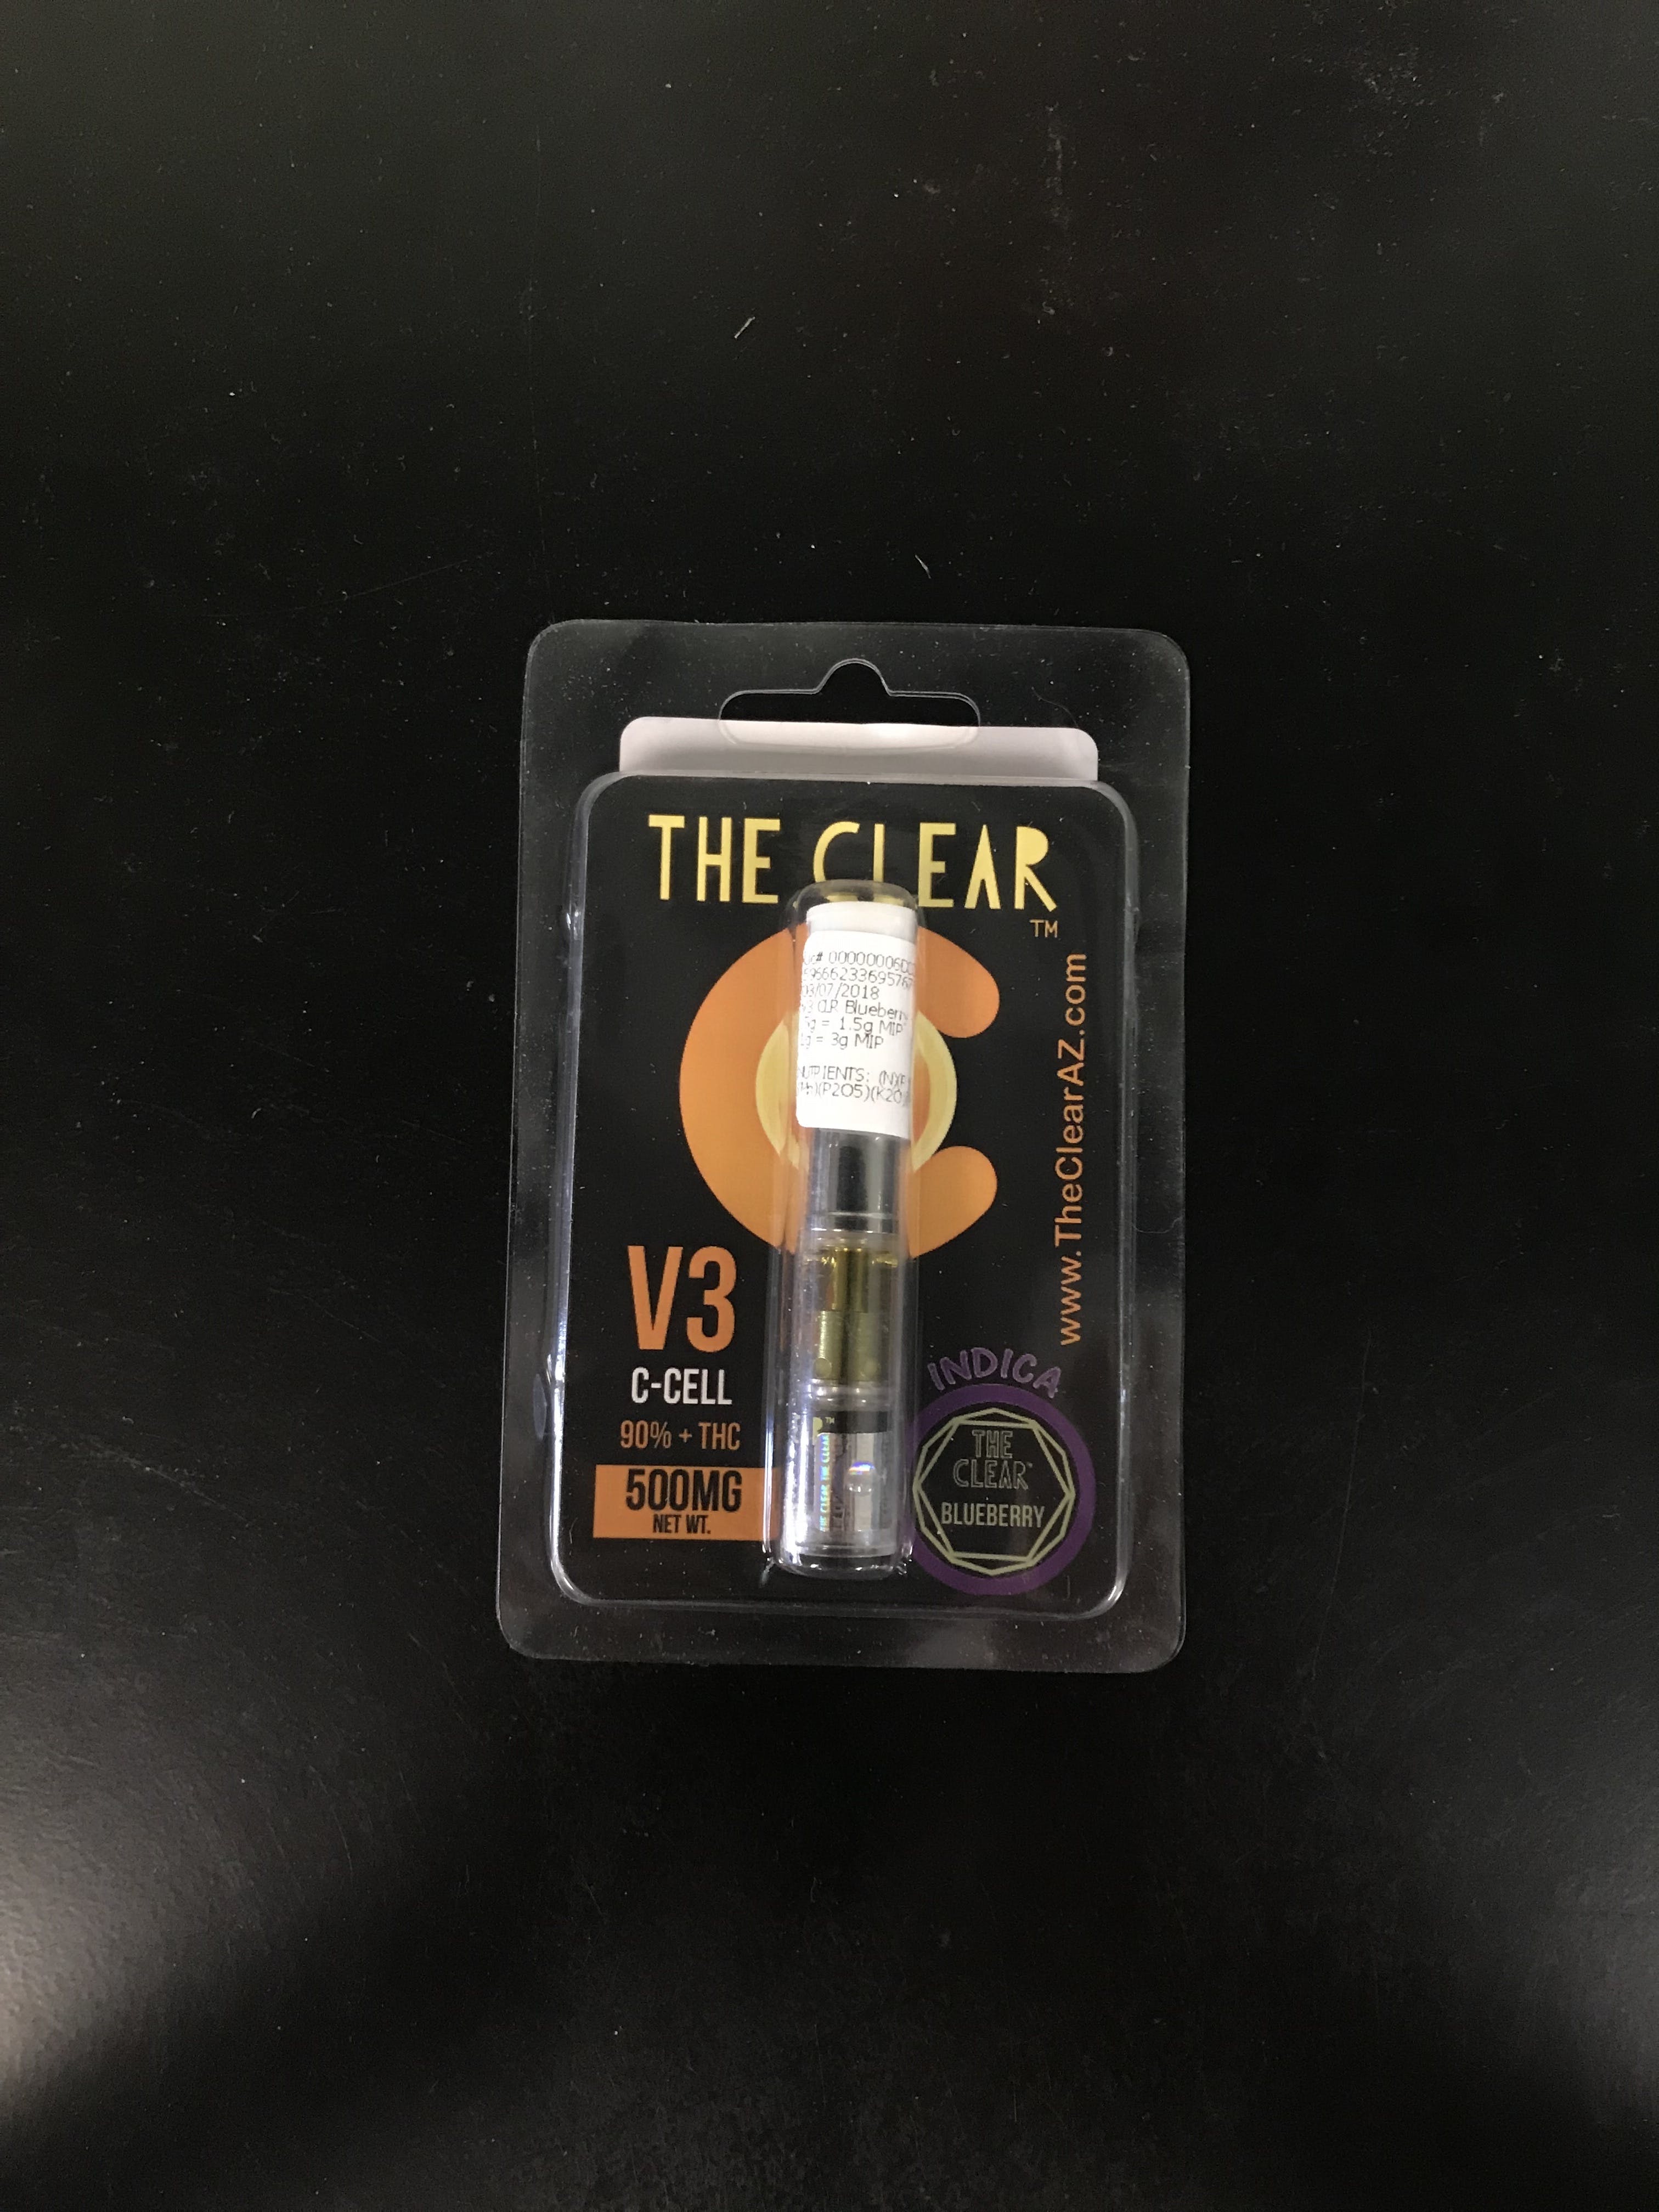 concentrate-the-clear-v3-blueberry-500mg-cartridge